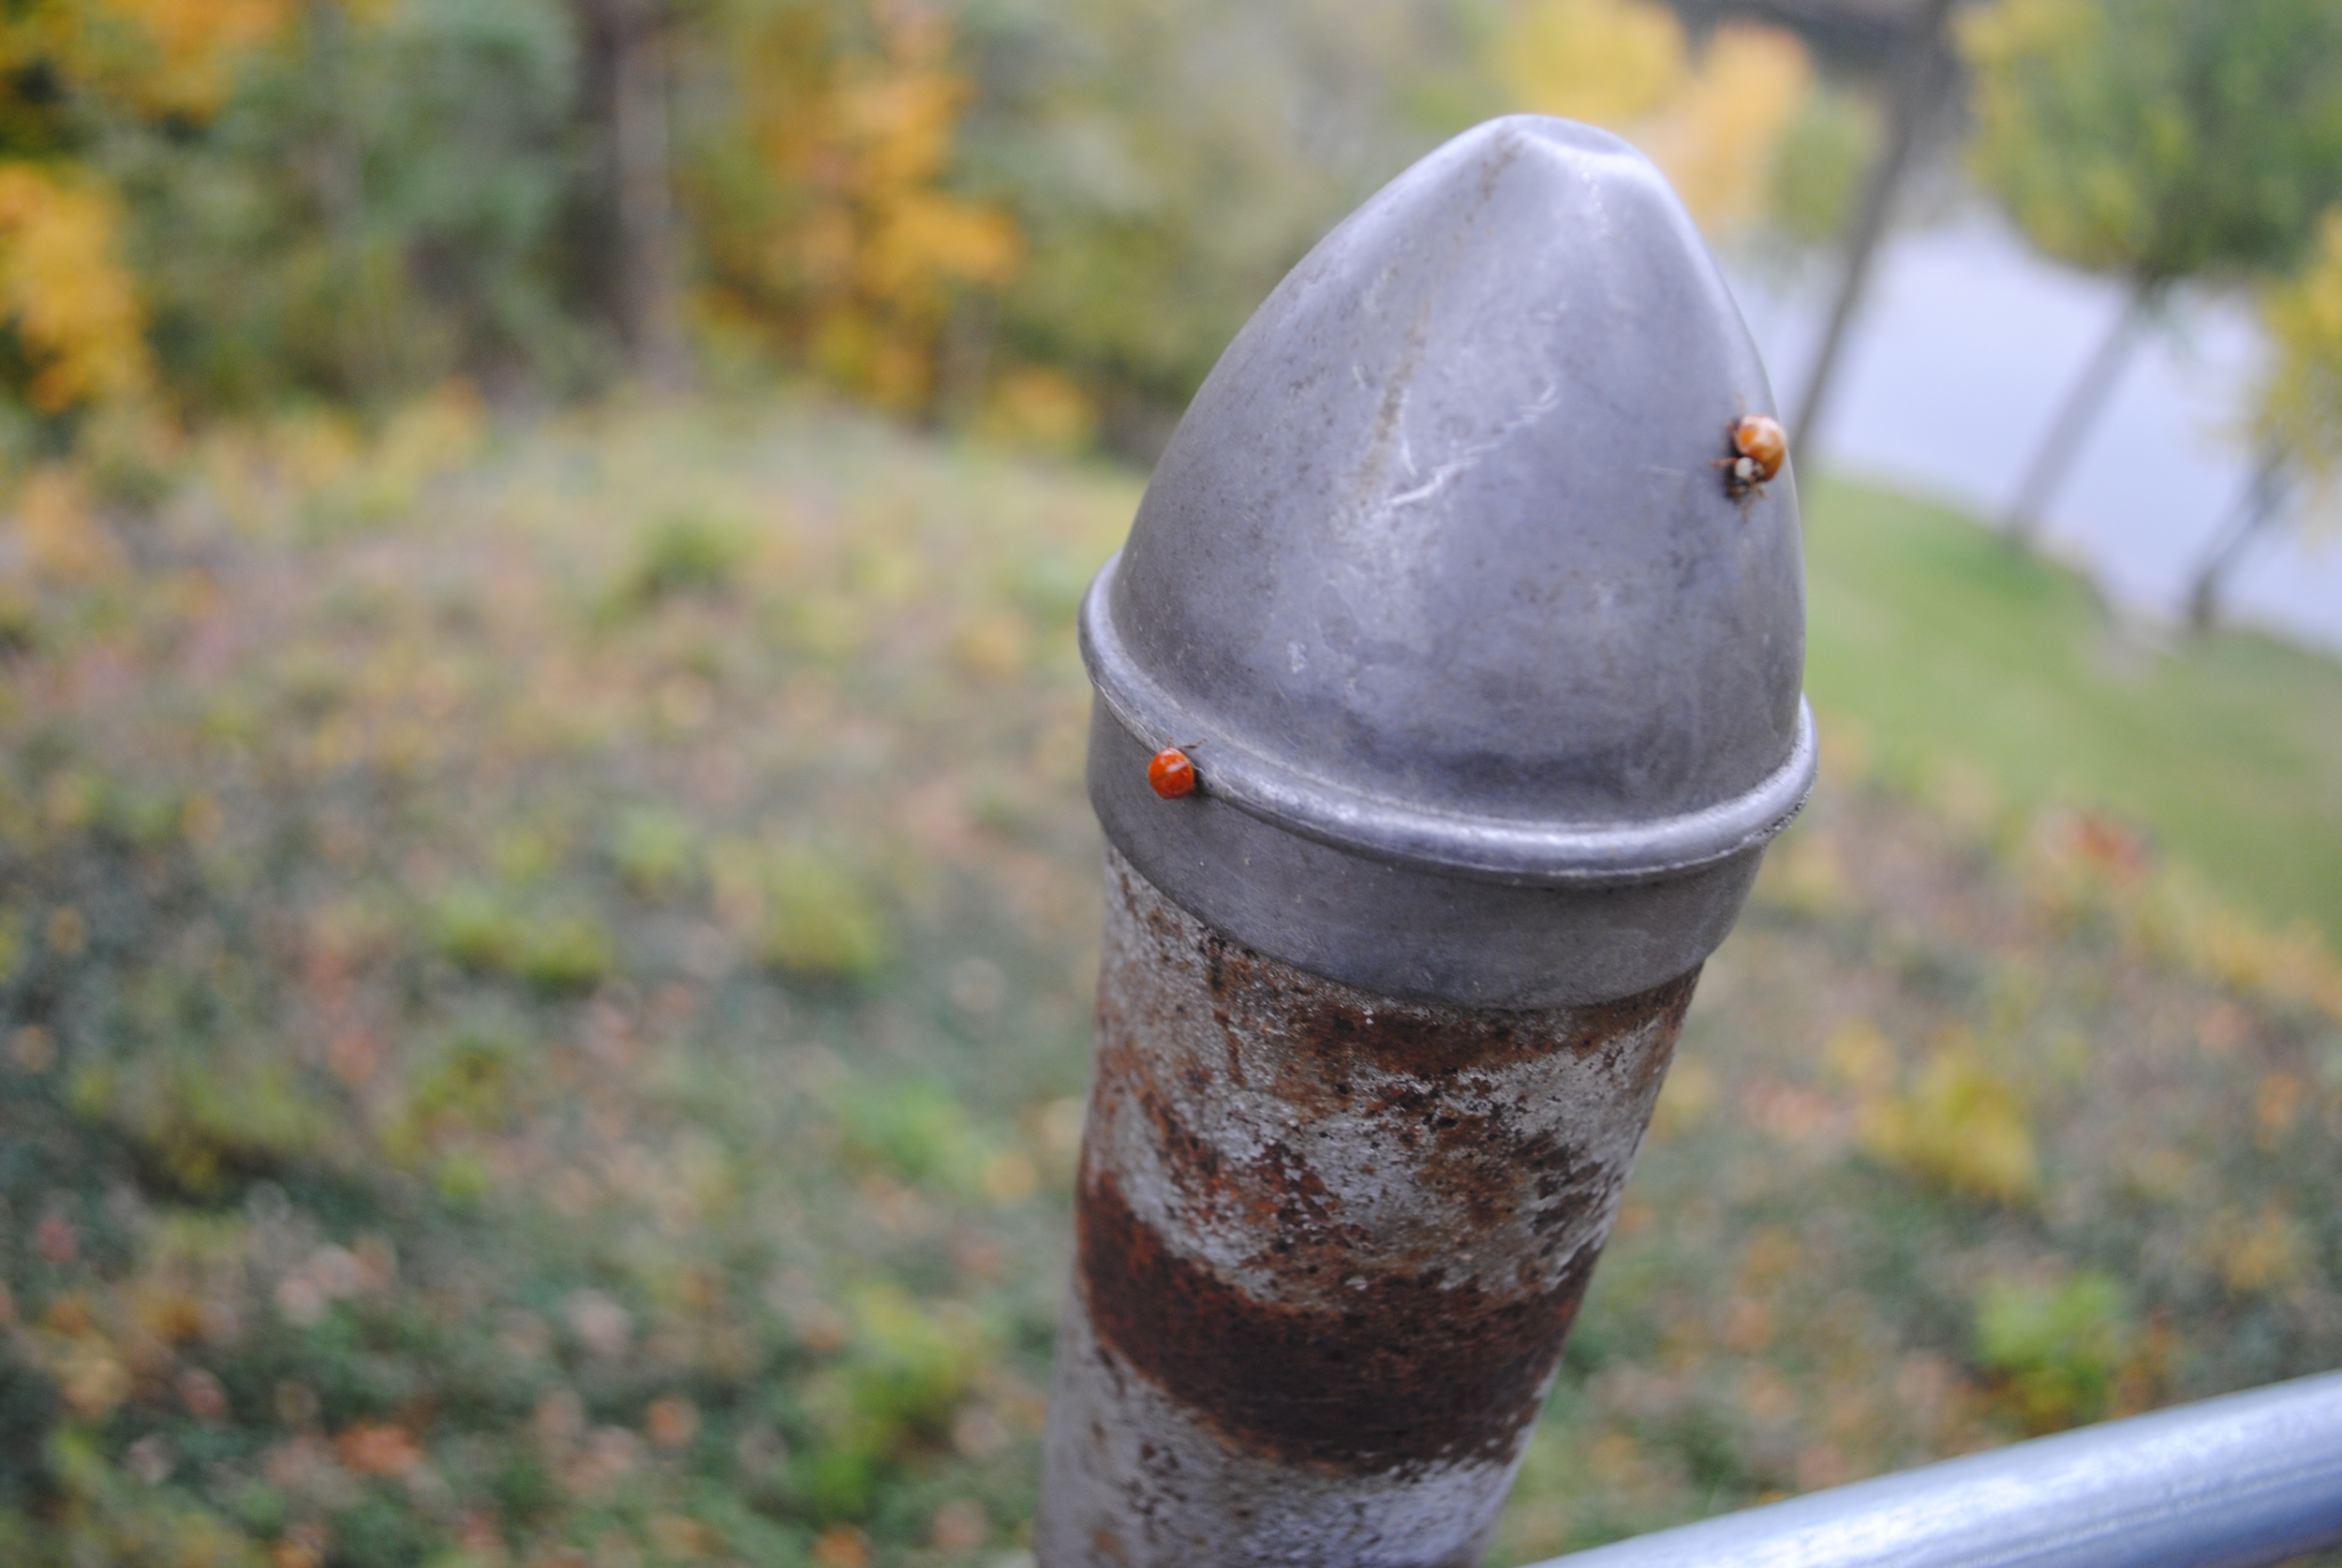 Ladybug invasion in late fall? A sign of good things to come...